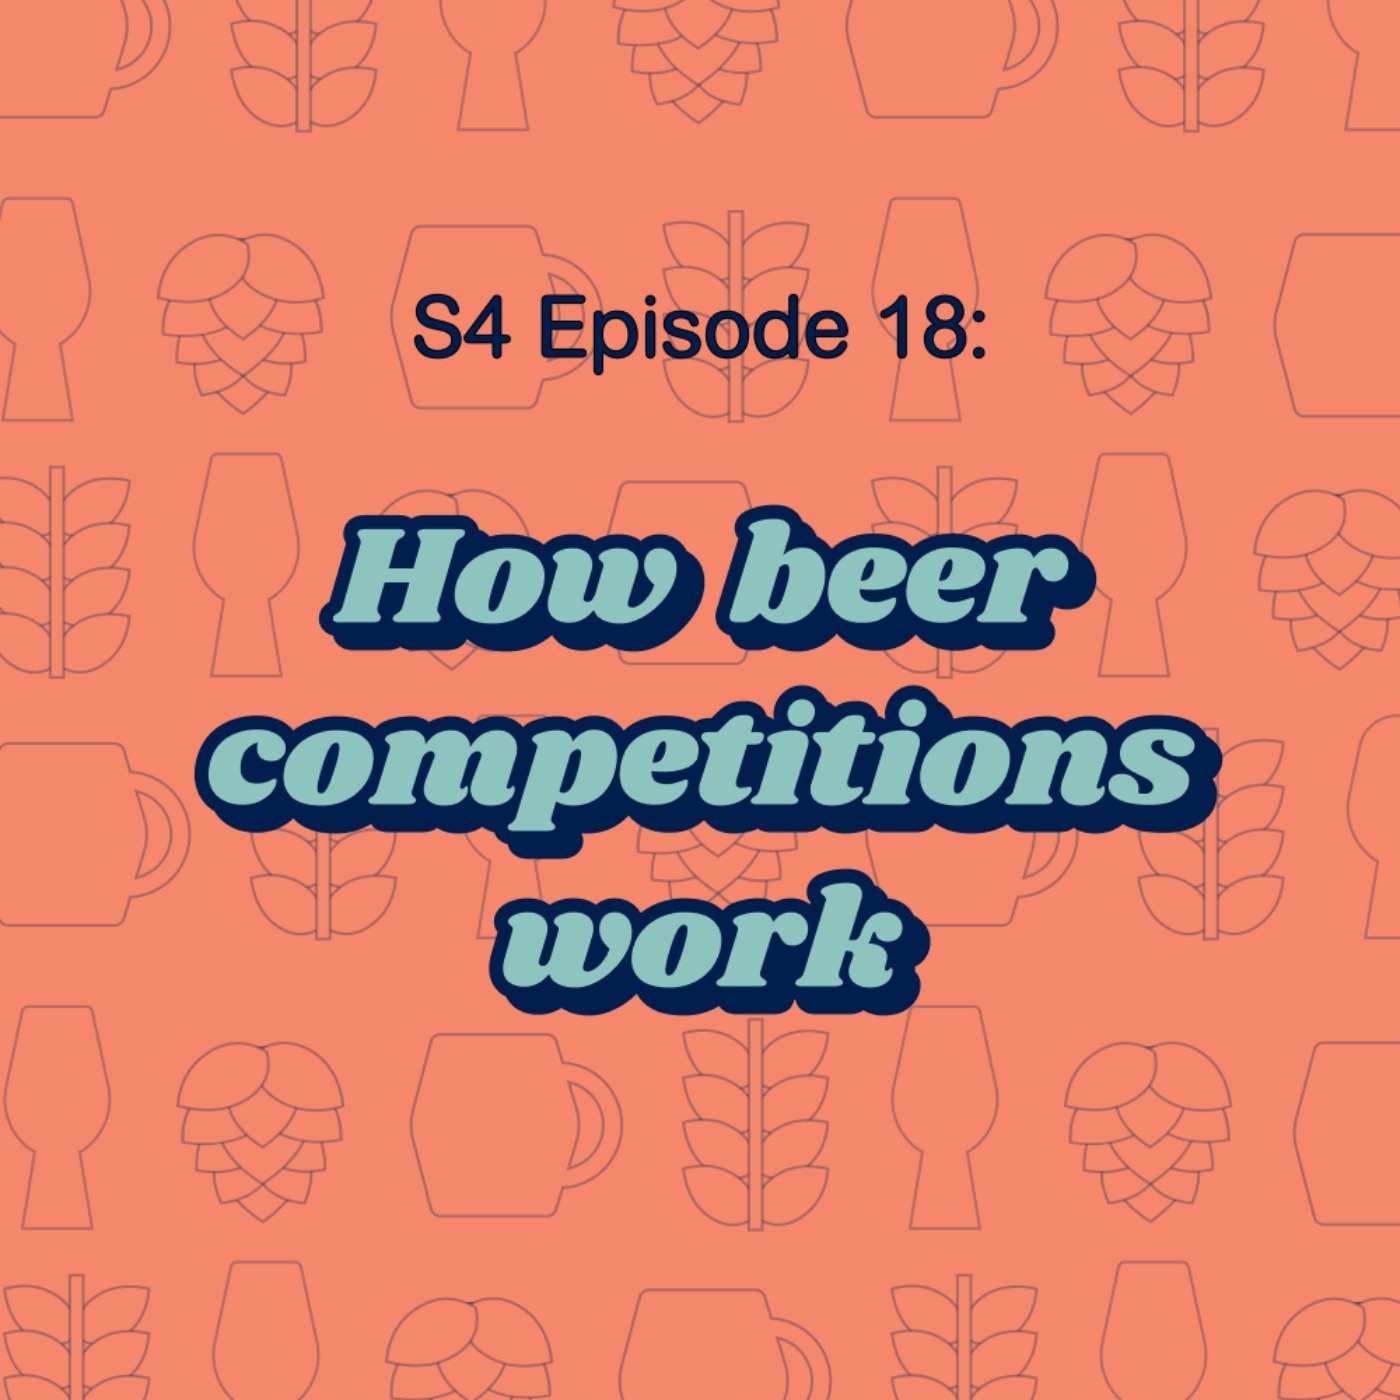 How beer competitions work